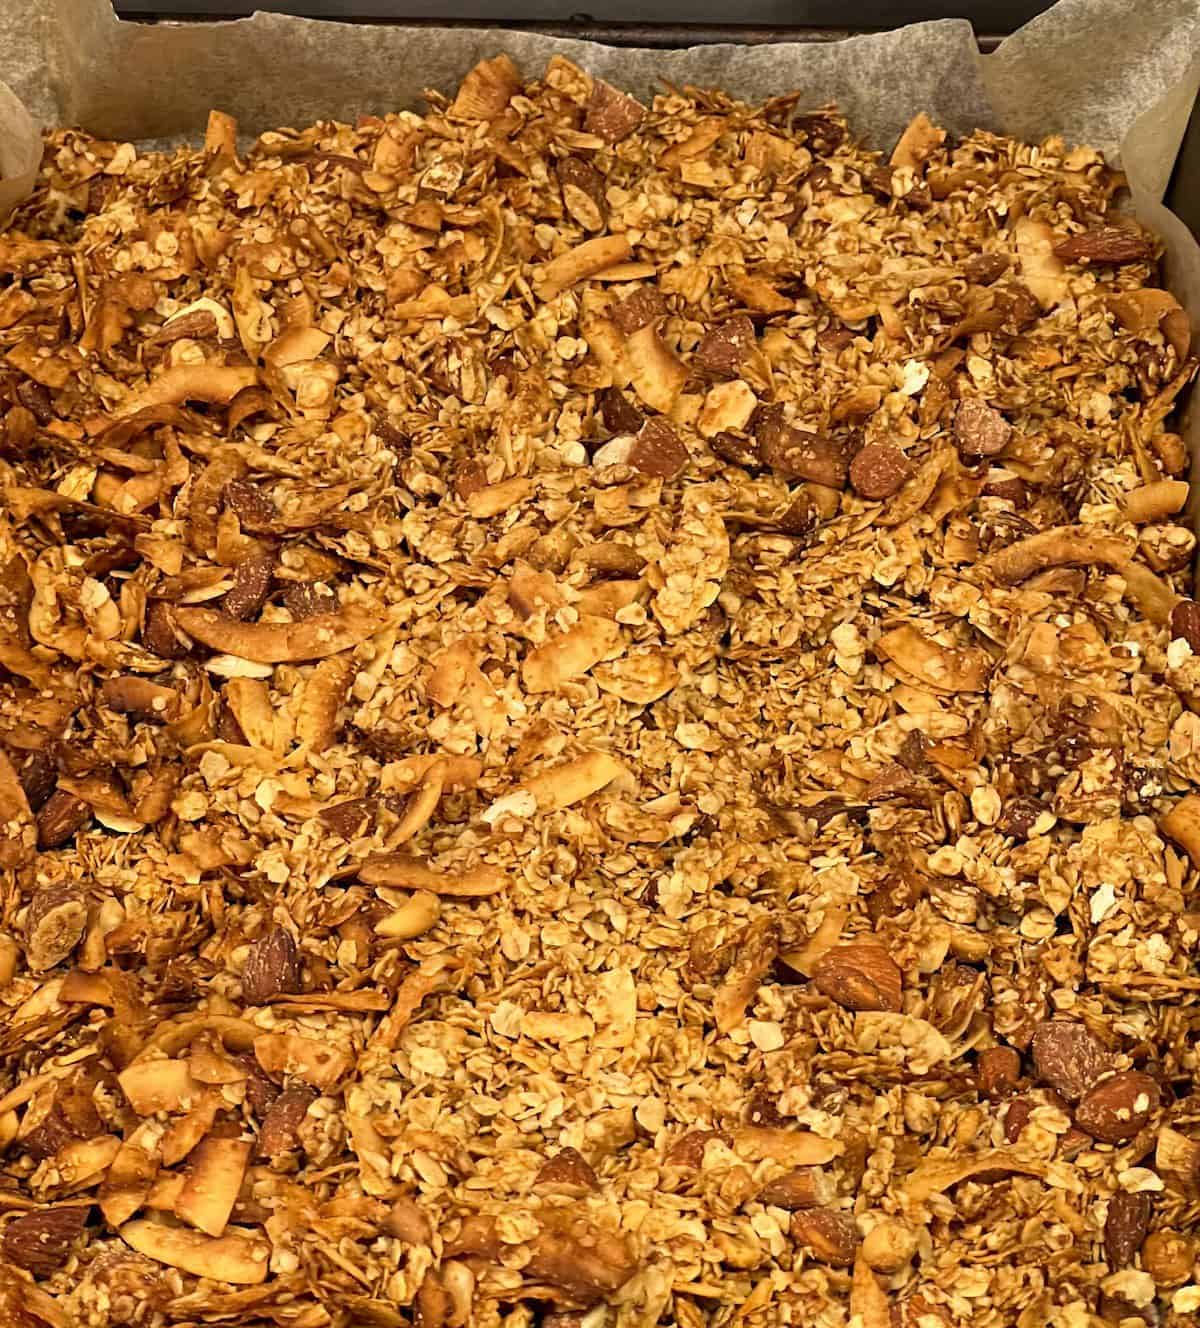 Crunchy peanut butter granola on a baking tray